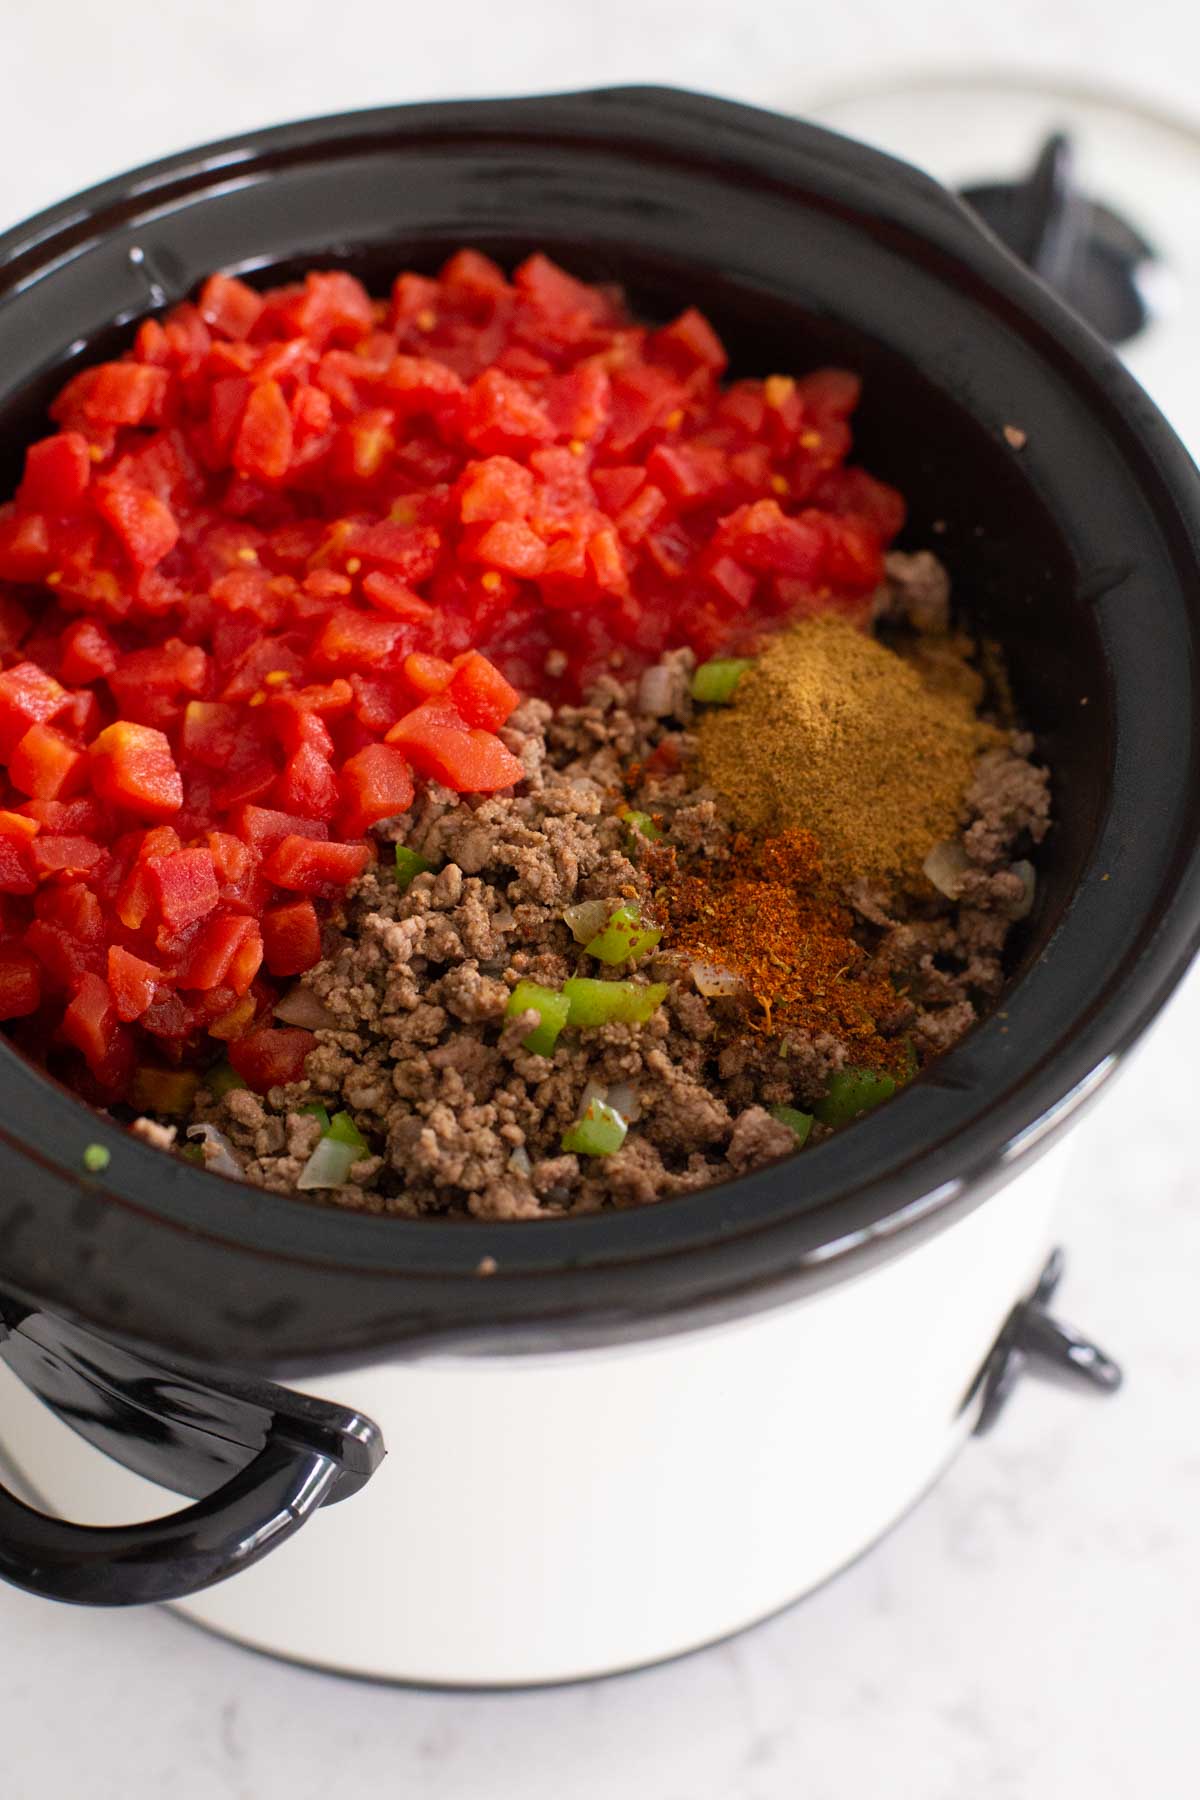 The diced tomatoes and seasonings have been added to the crockpot.